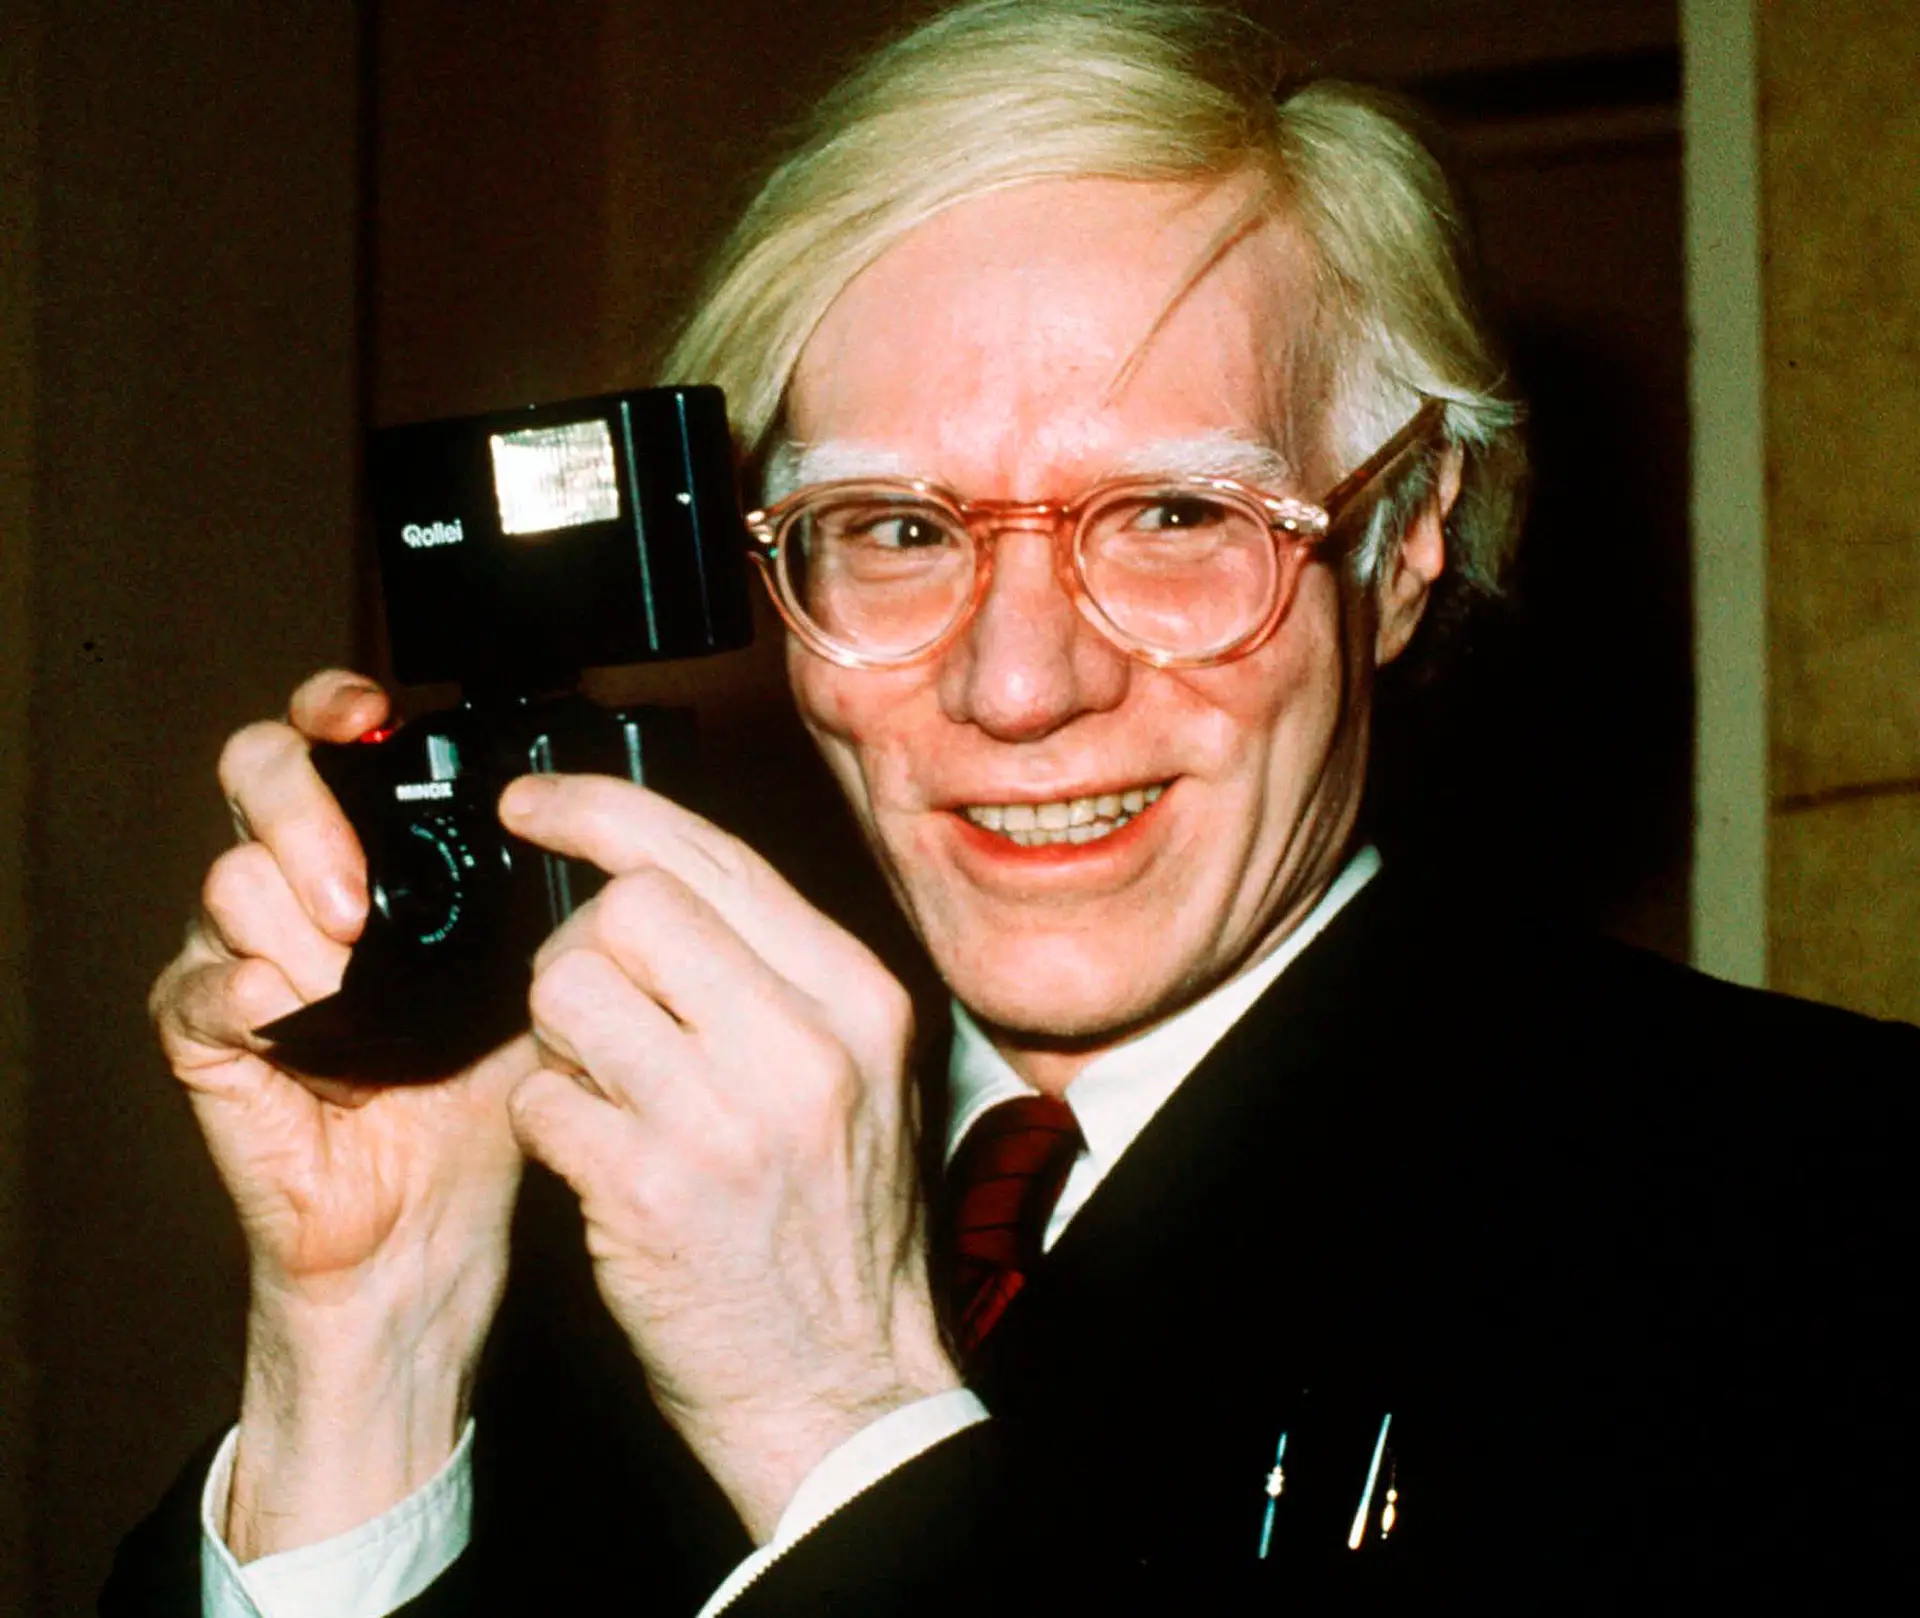 FILE – In this 1976 file photo, pop artist Andy Warhol smiles in New York. The Supreme Court has agreed to review a copyright dispute involving works of art by Warhol and a photographer who took an image of the musician Prince that the works are based on. (AP Photo/Richard Drew, File)